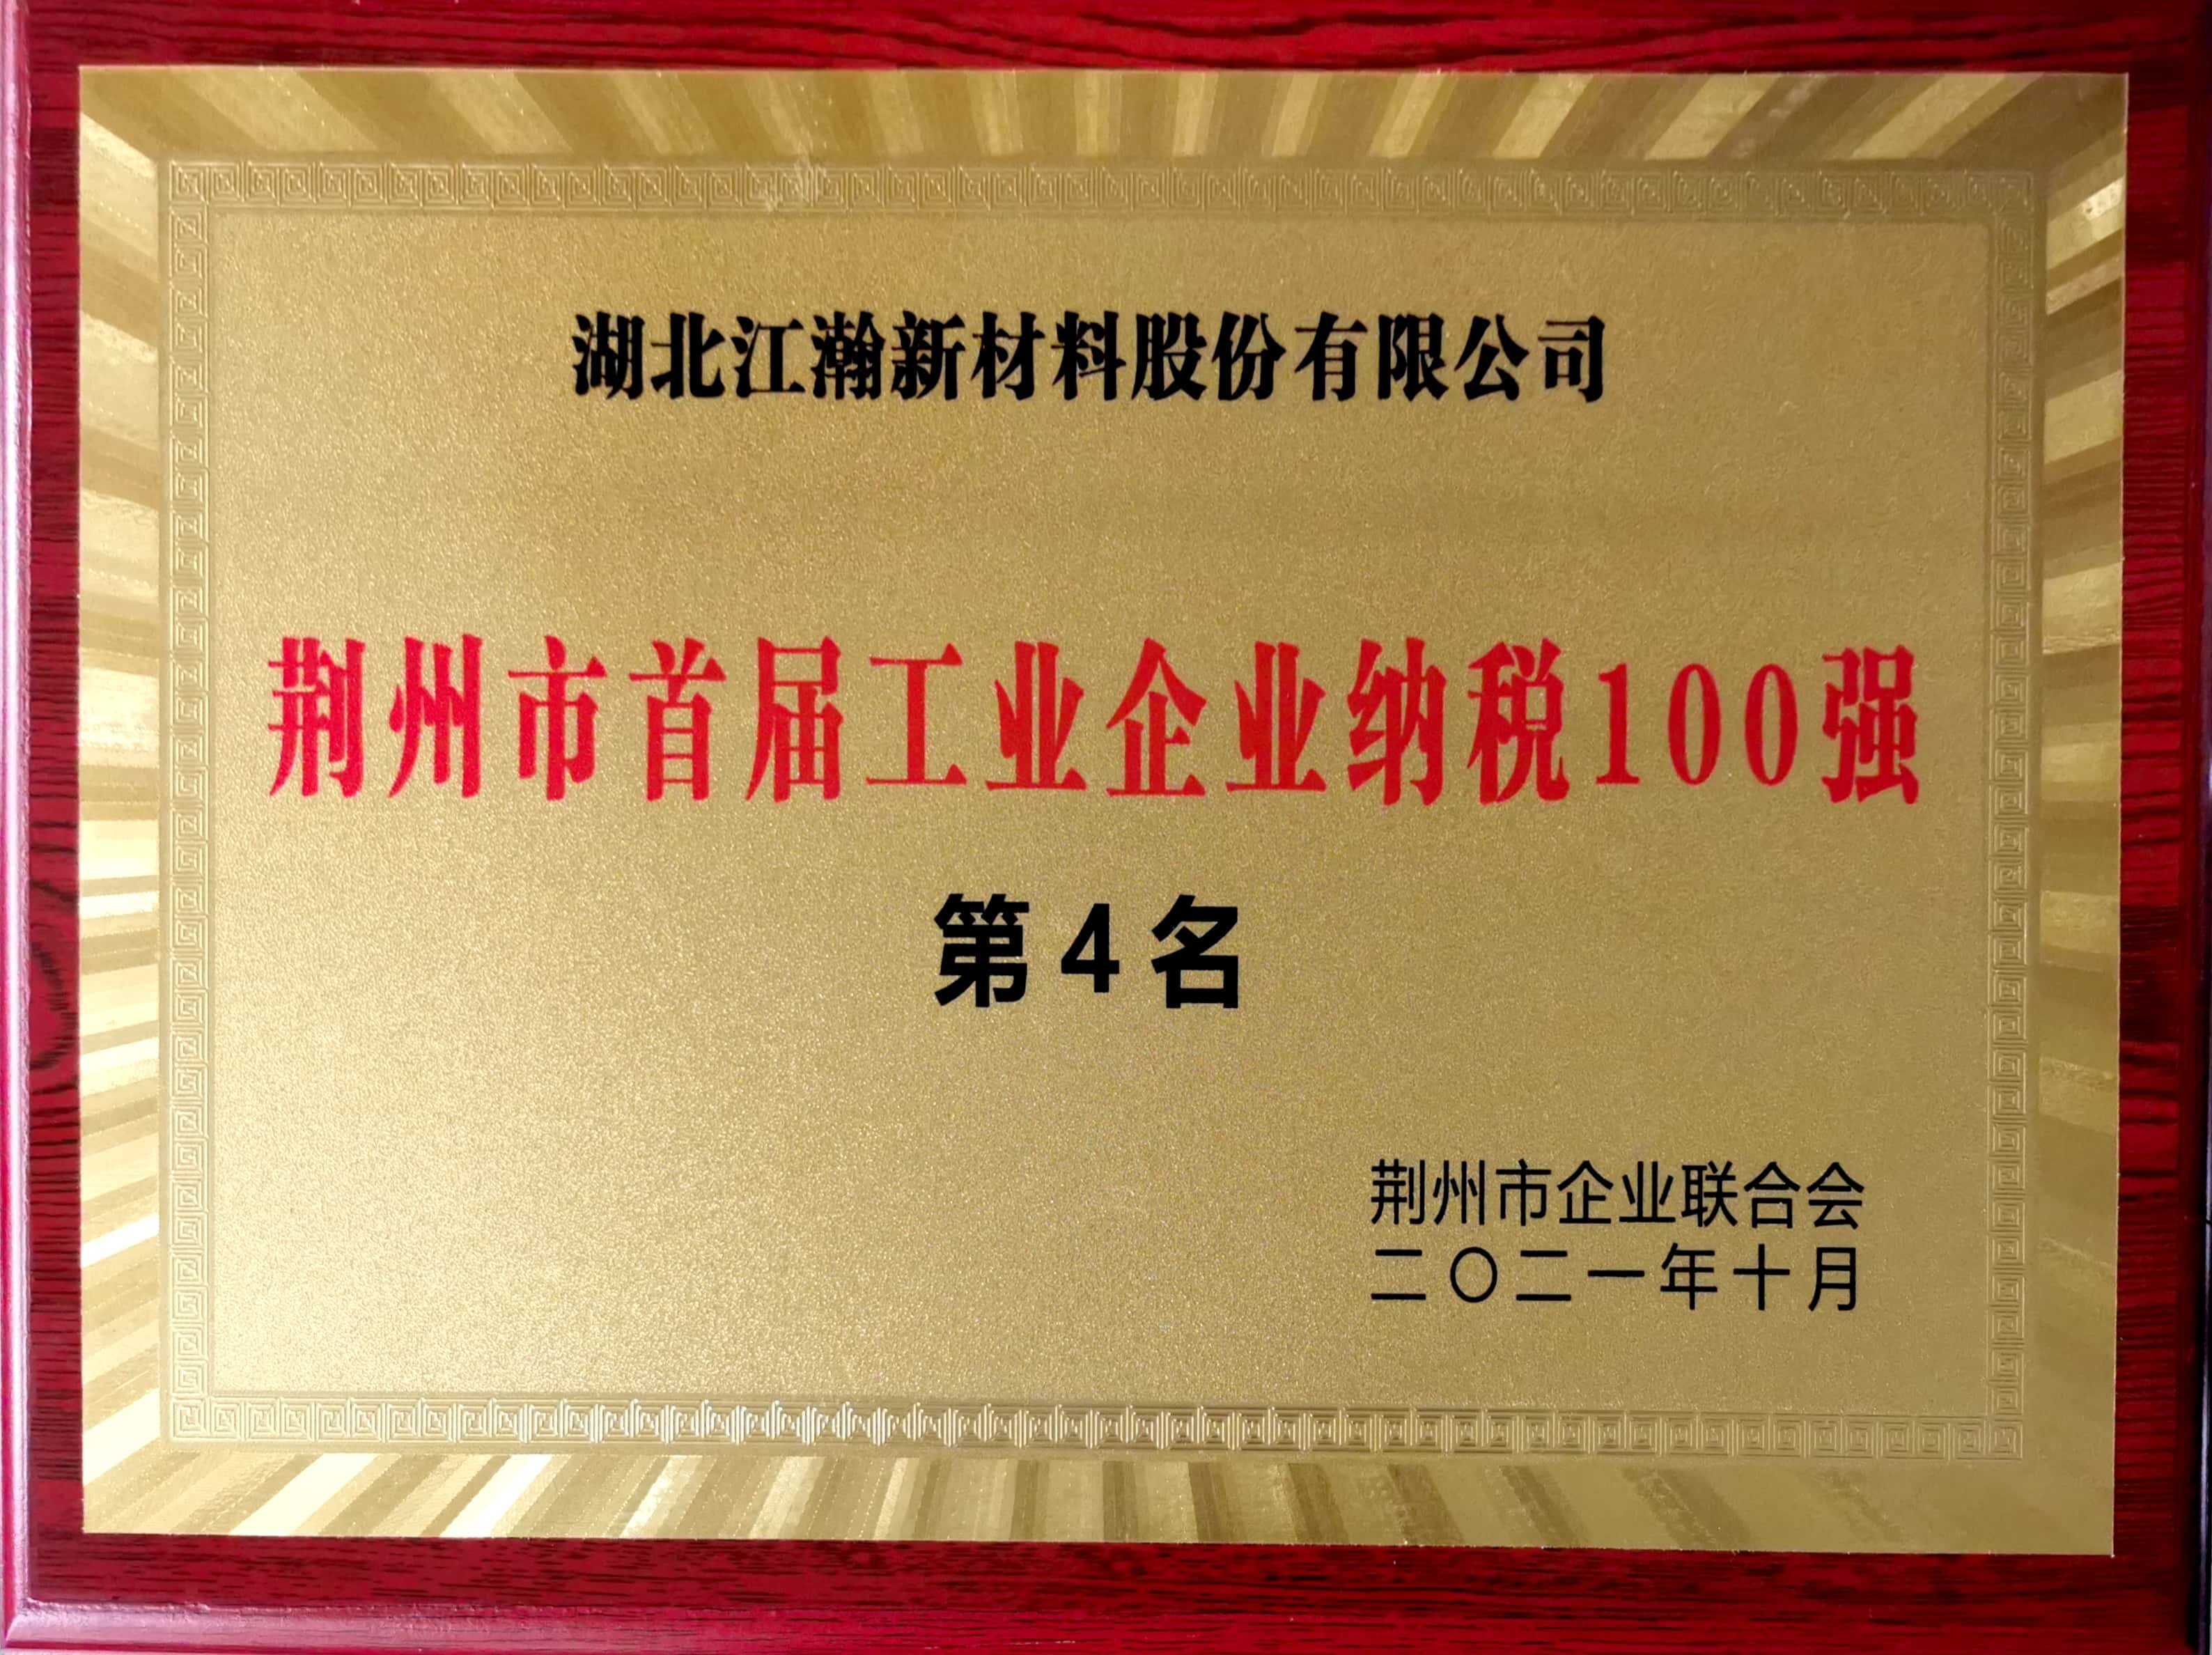 The First Top 100 Industrial Enterprise Tax Payers in Jingzhou City